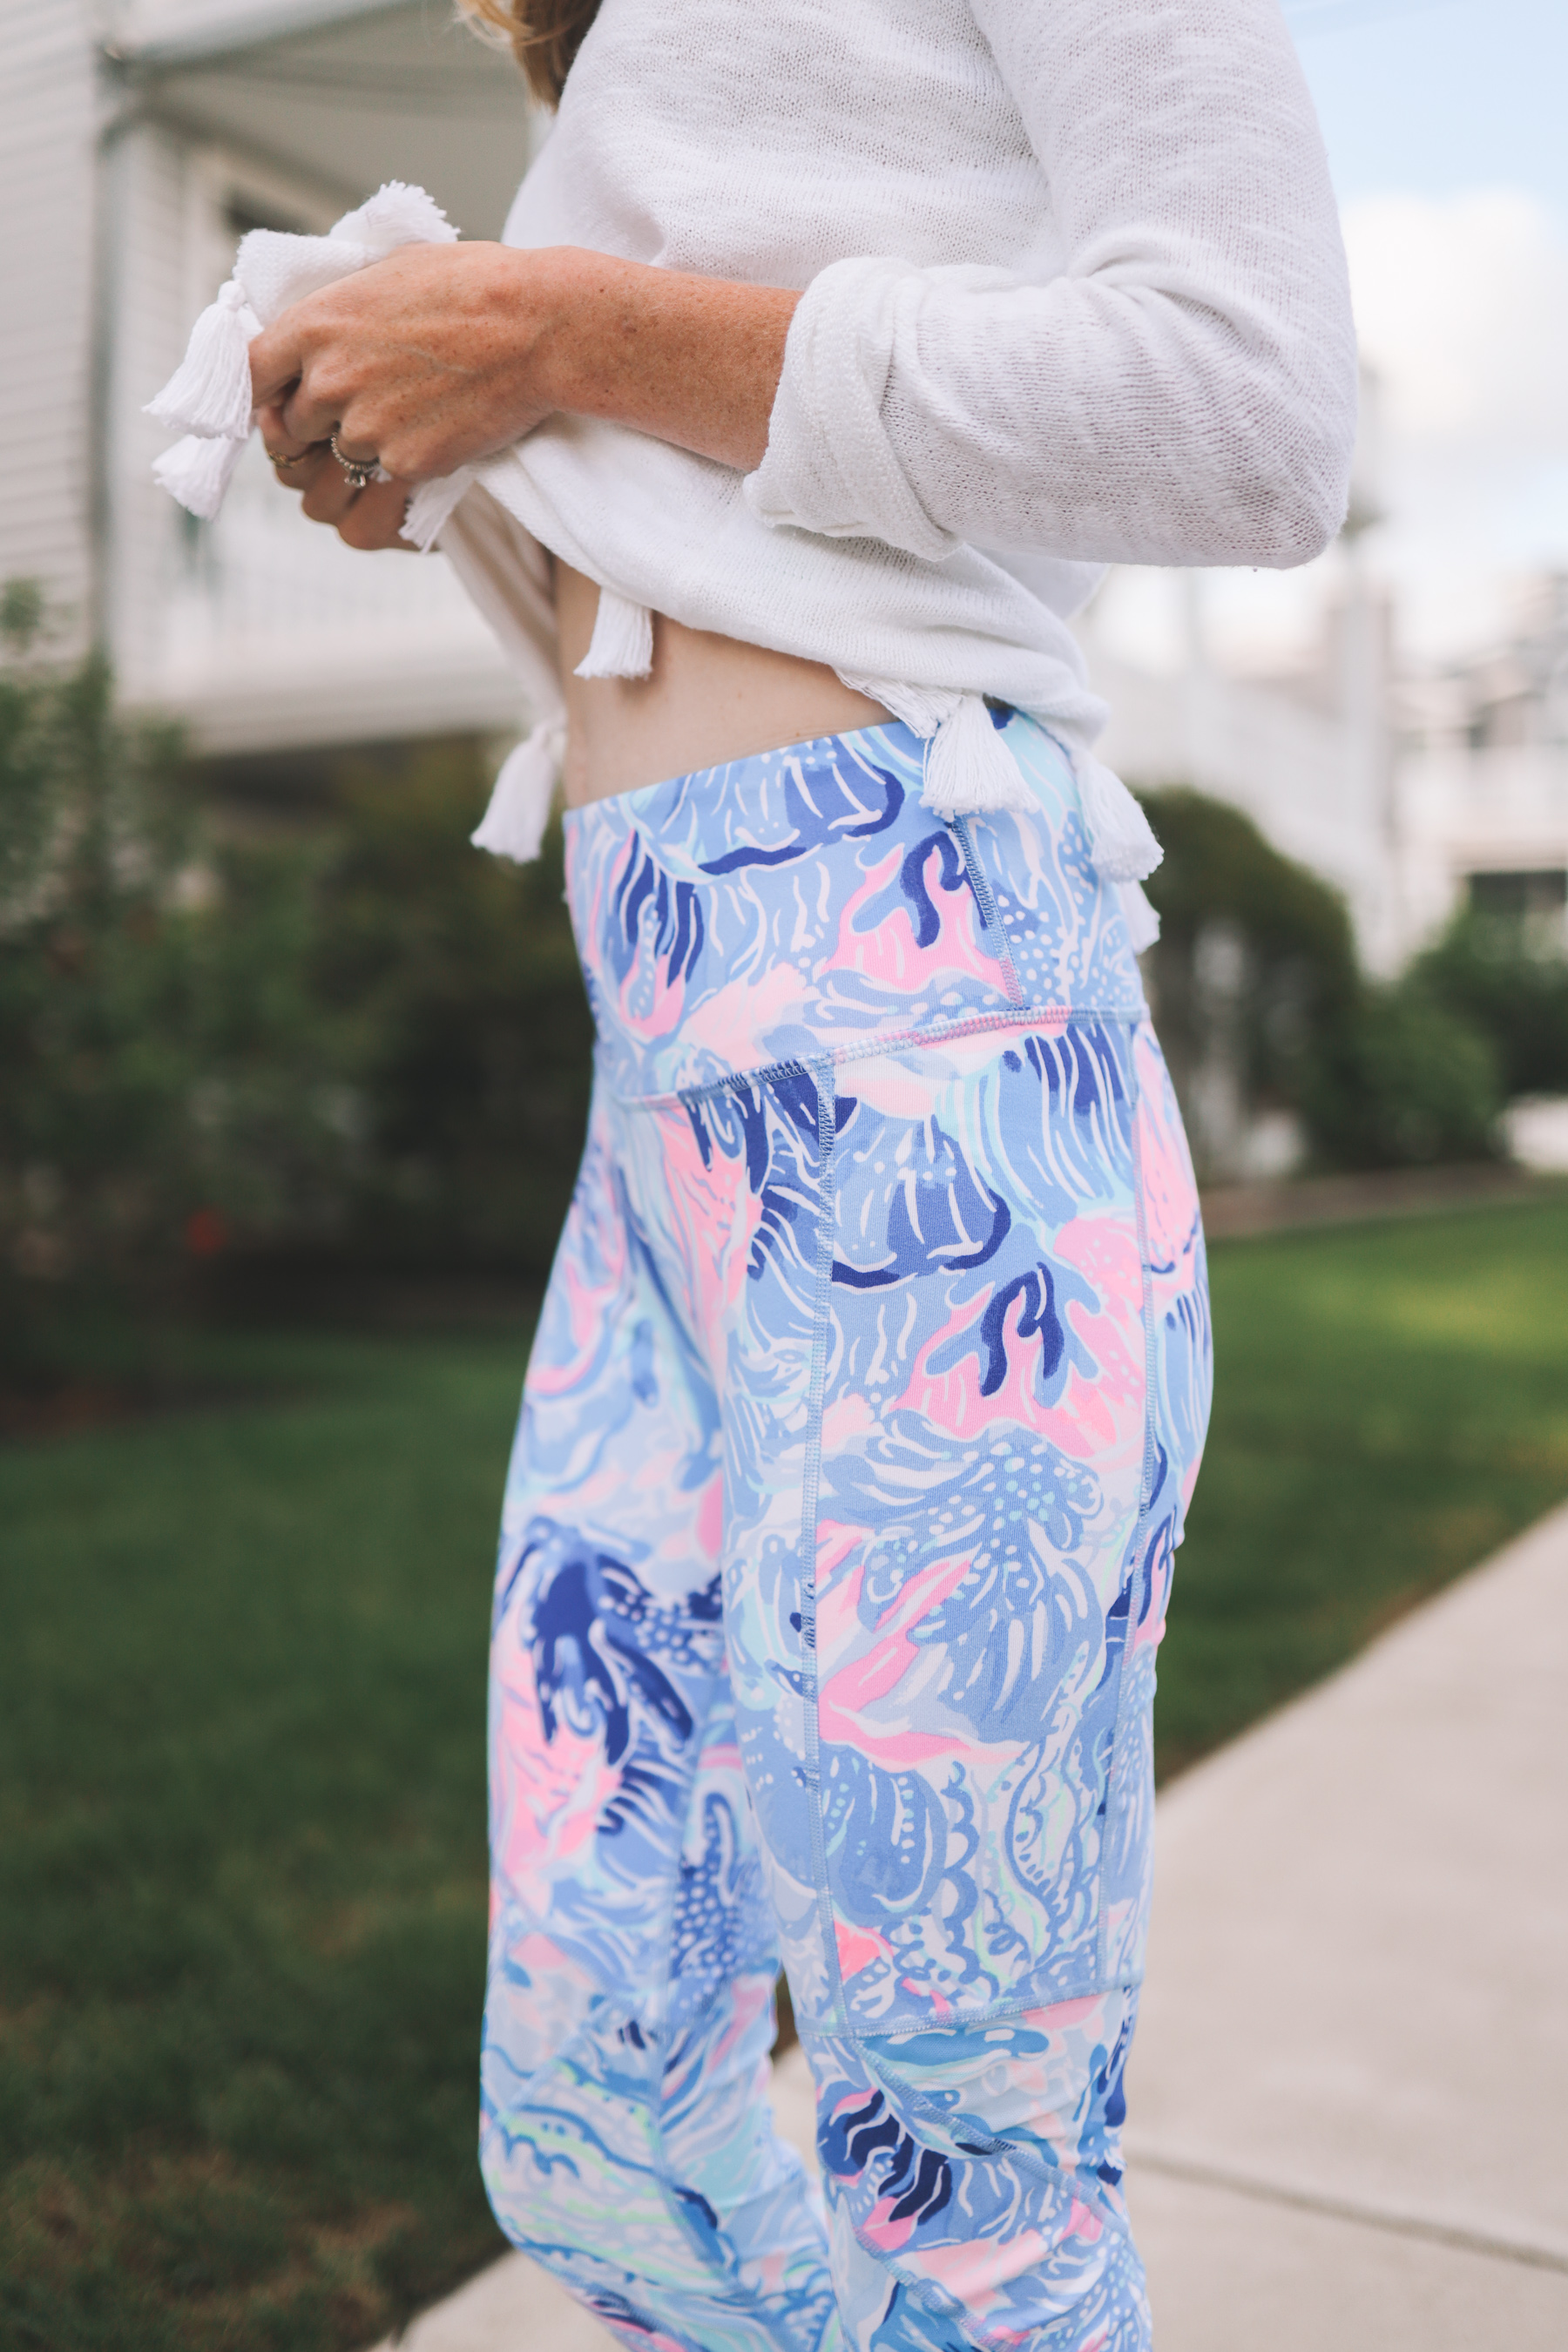 Best Of: Lilly Pulitzer After Party Sale